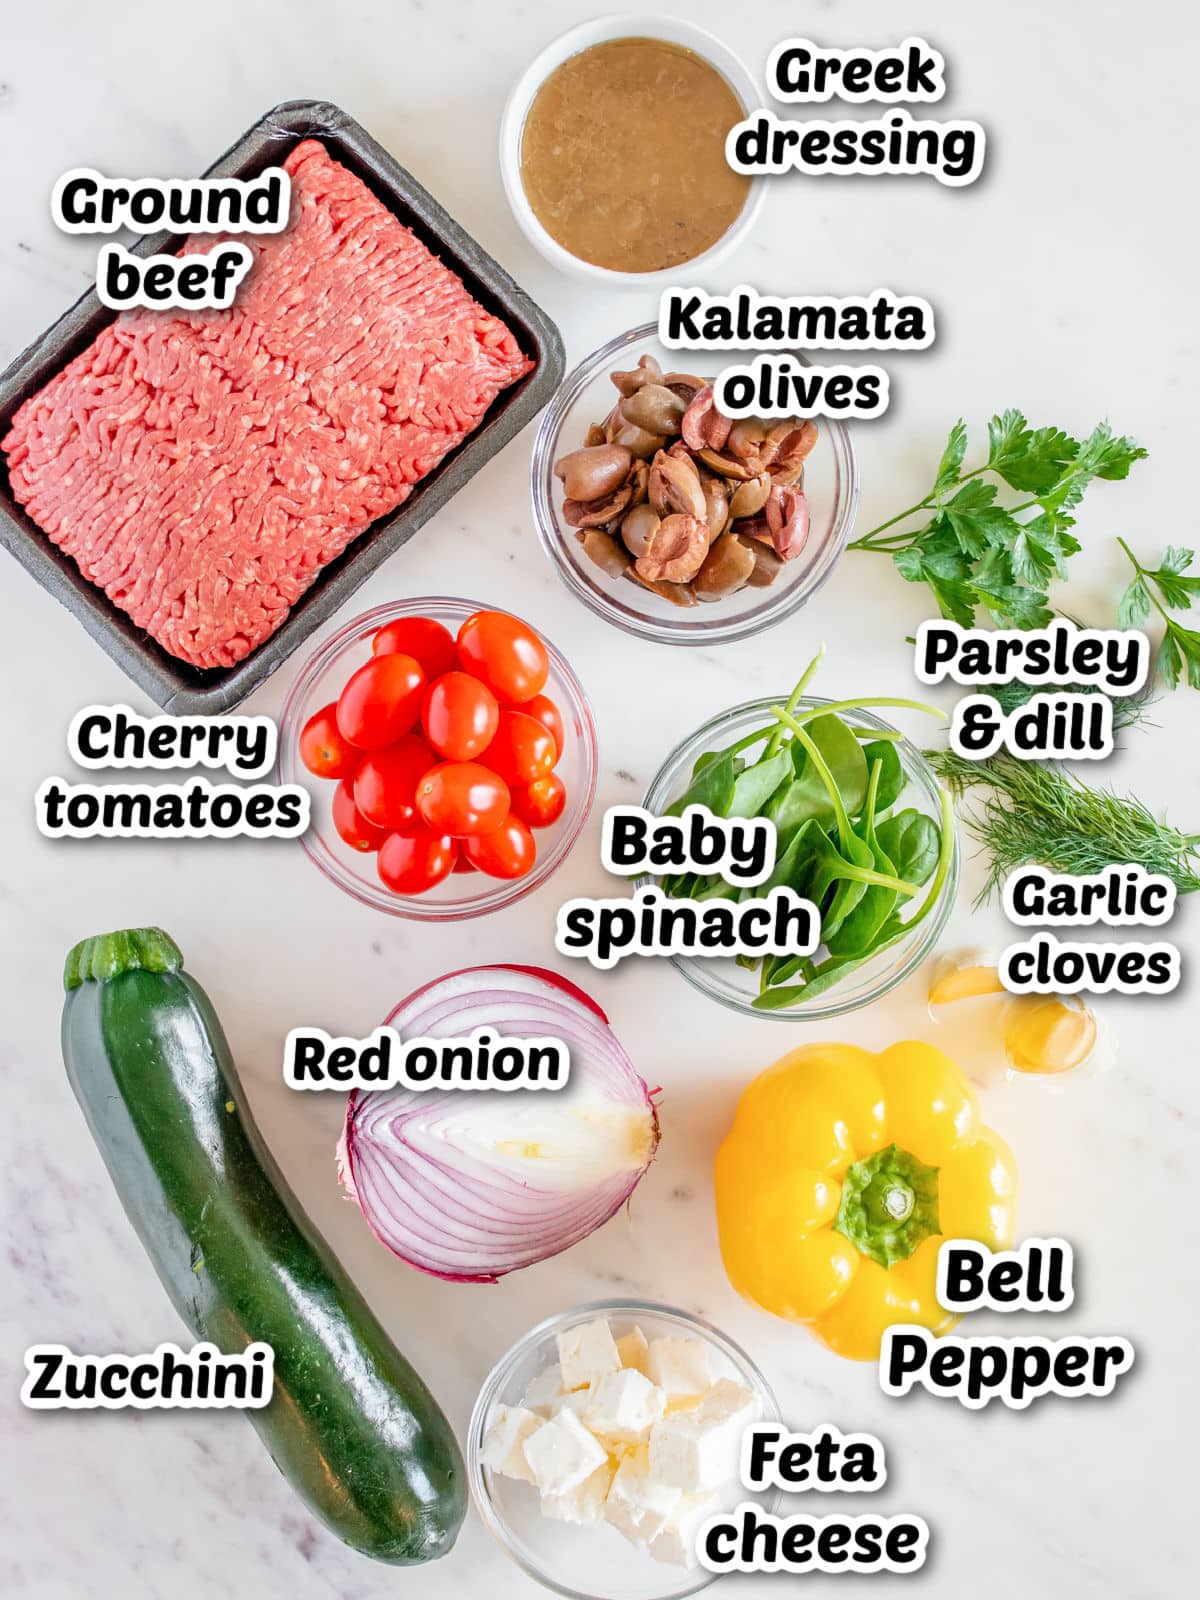 Various fresh ingredients for a greek salad with ground beef, labeled for identification.